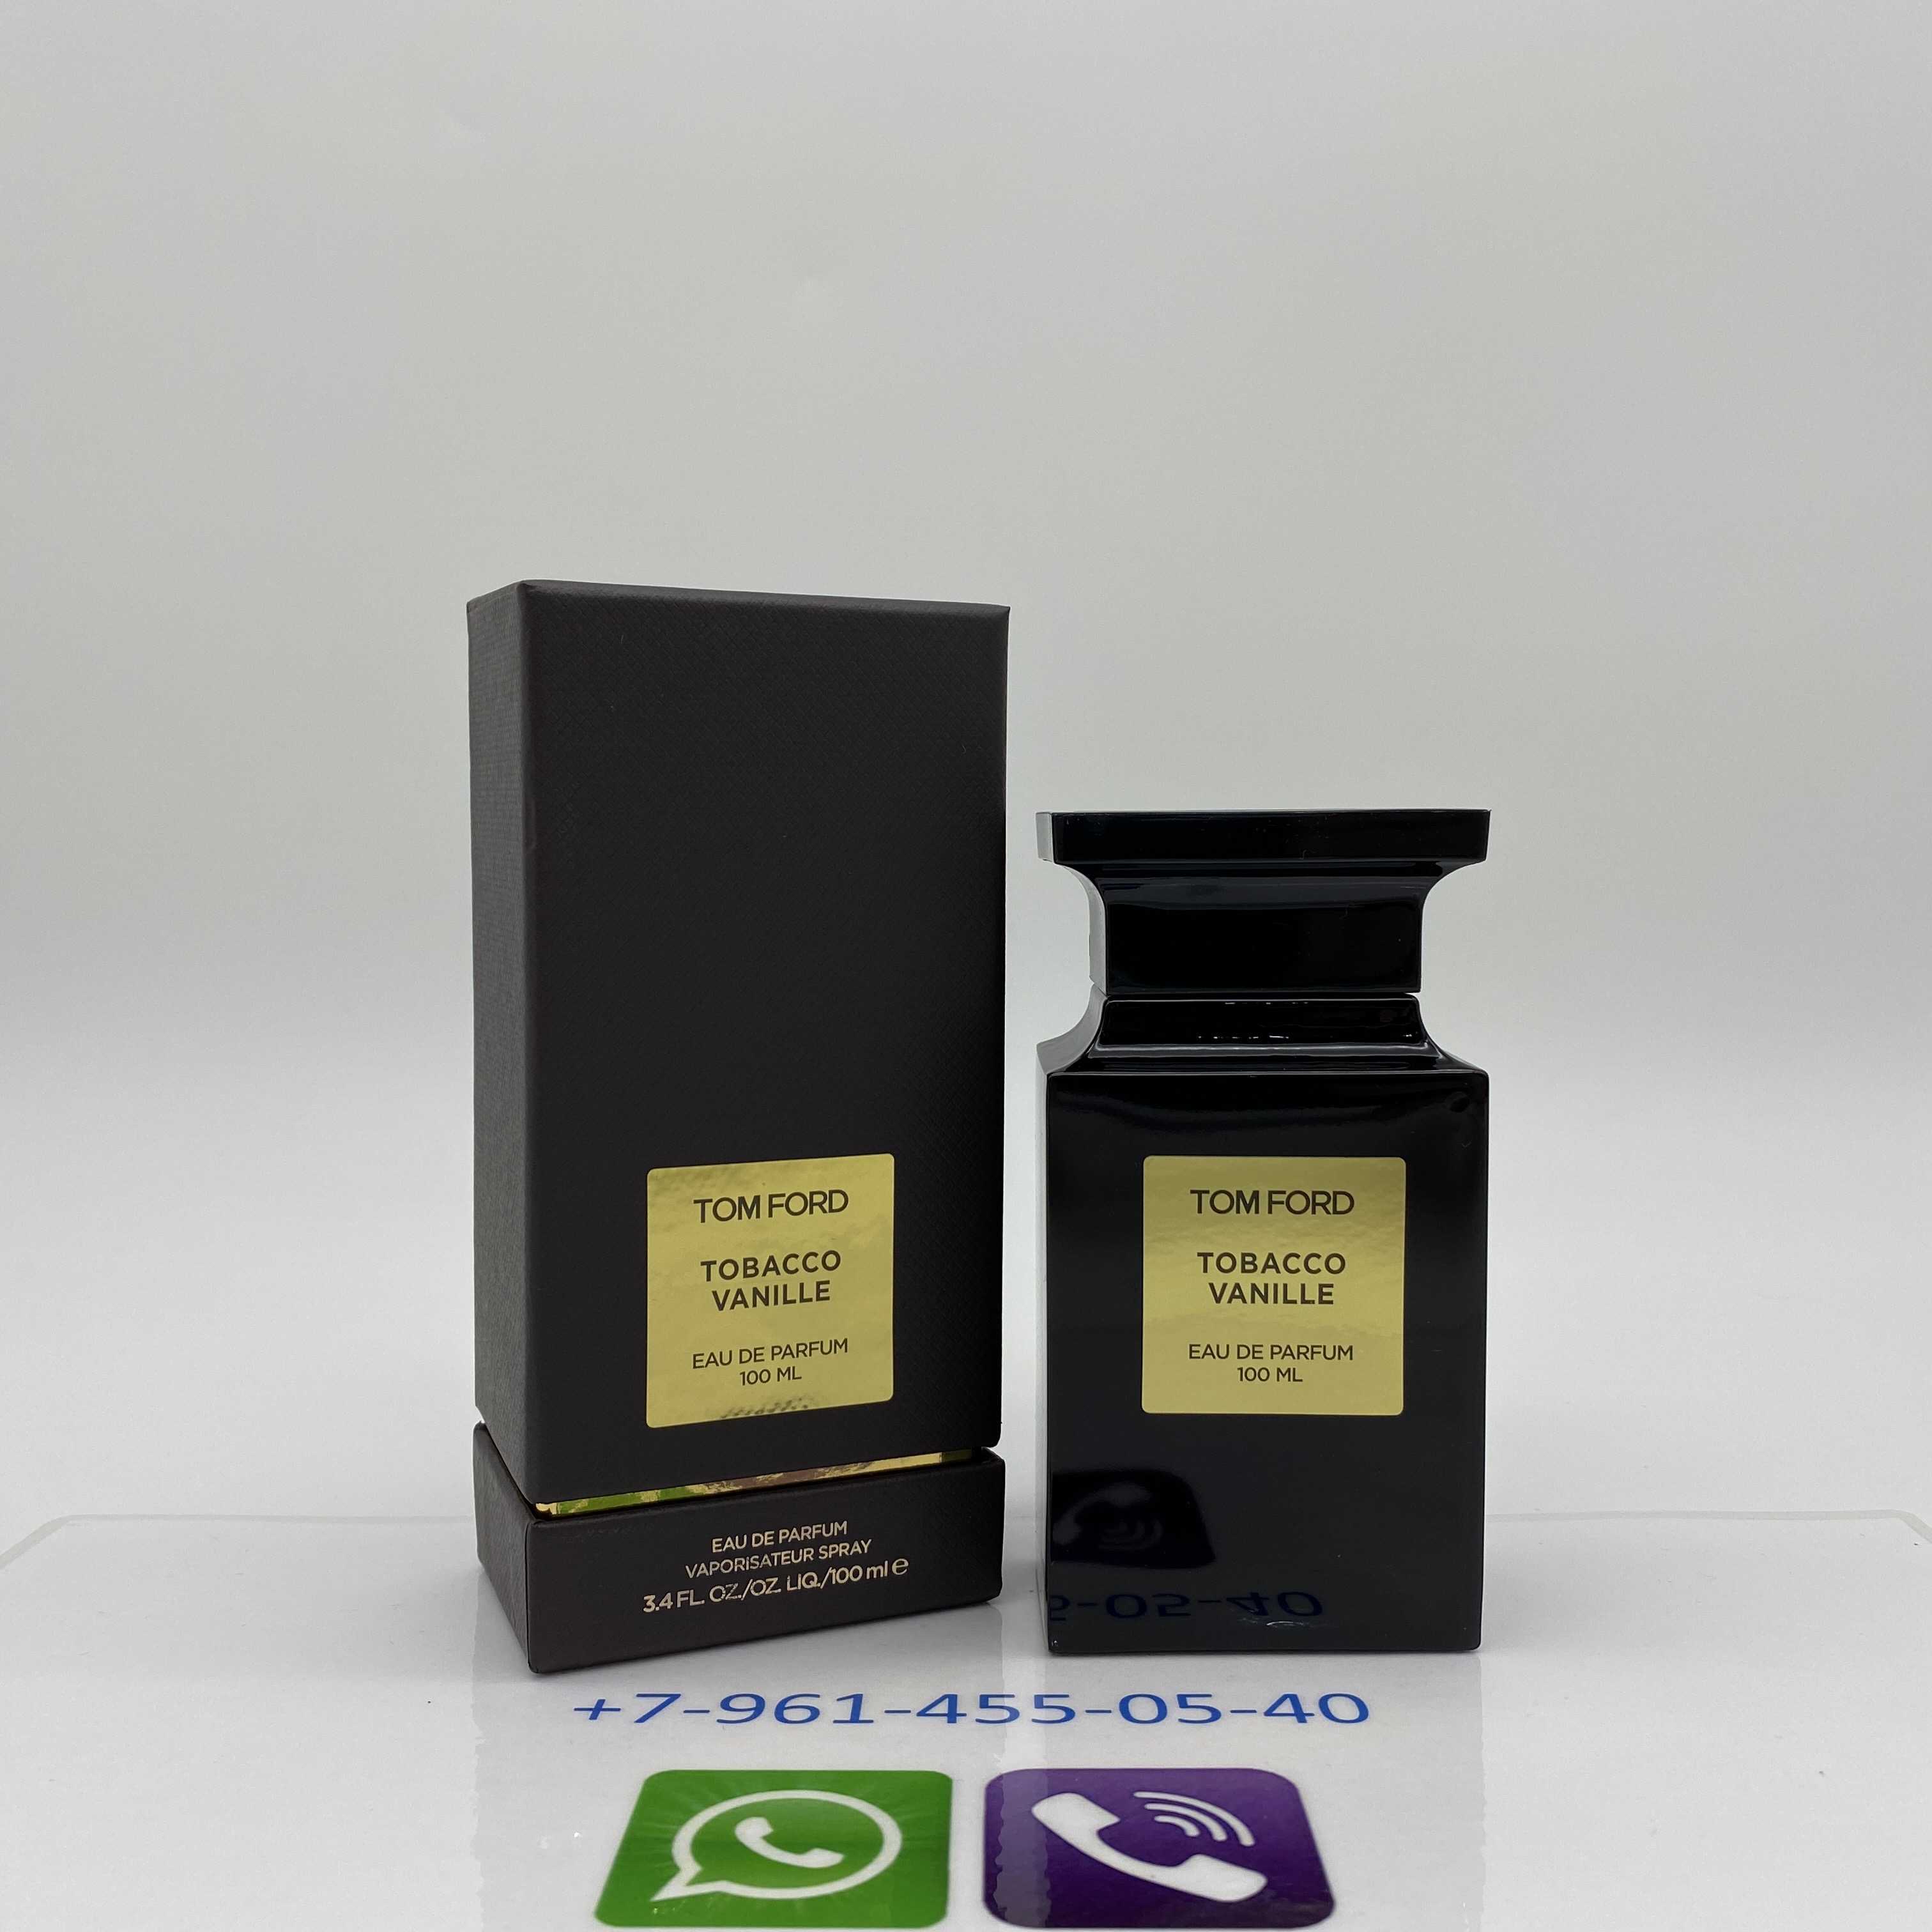 Tobacco vanille парфюмерная вода. Tom Ford Tobacco Vanille 100ml. Tobacco Vanille Tom Ford 100мл. Том Форд Тобакко ваниль 100 мл. Tom Ford Tobacco Vanille 250 мл.